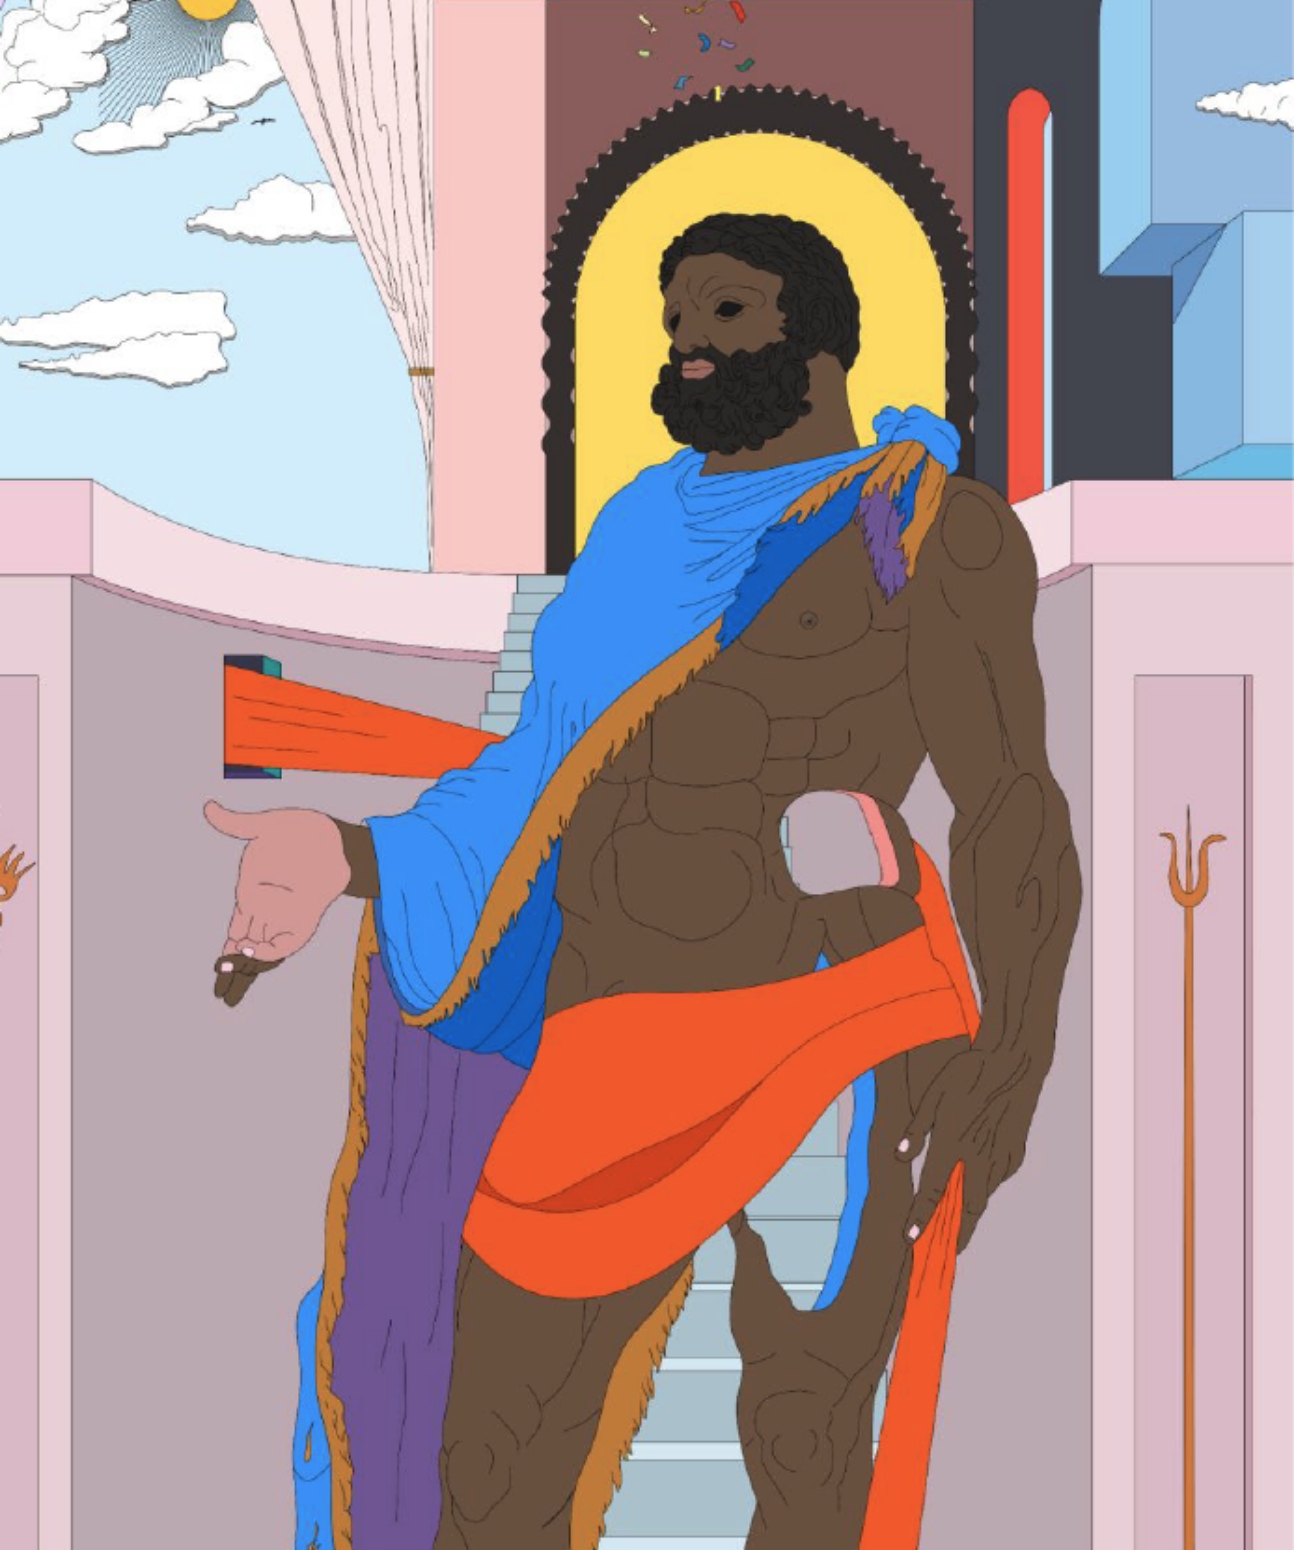 Digital illustration of a Black man wearing a blue and purple mantle draped over the shoulder and an orange cloth around his waist. The cloth is being tugged in different directions. The figure is standing in front of stairs that lead to a door